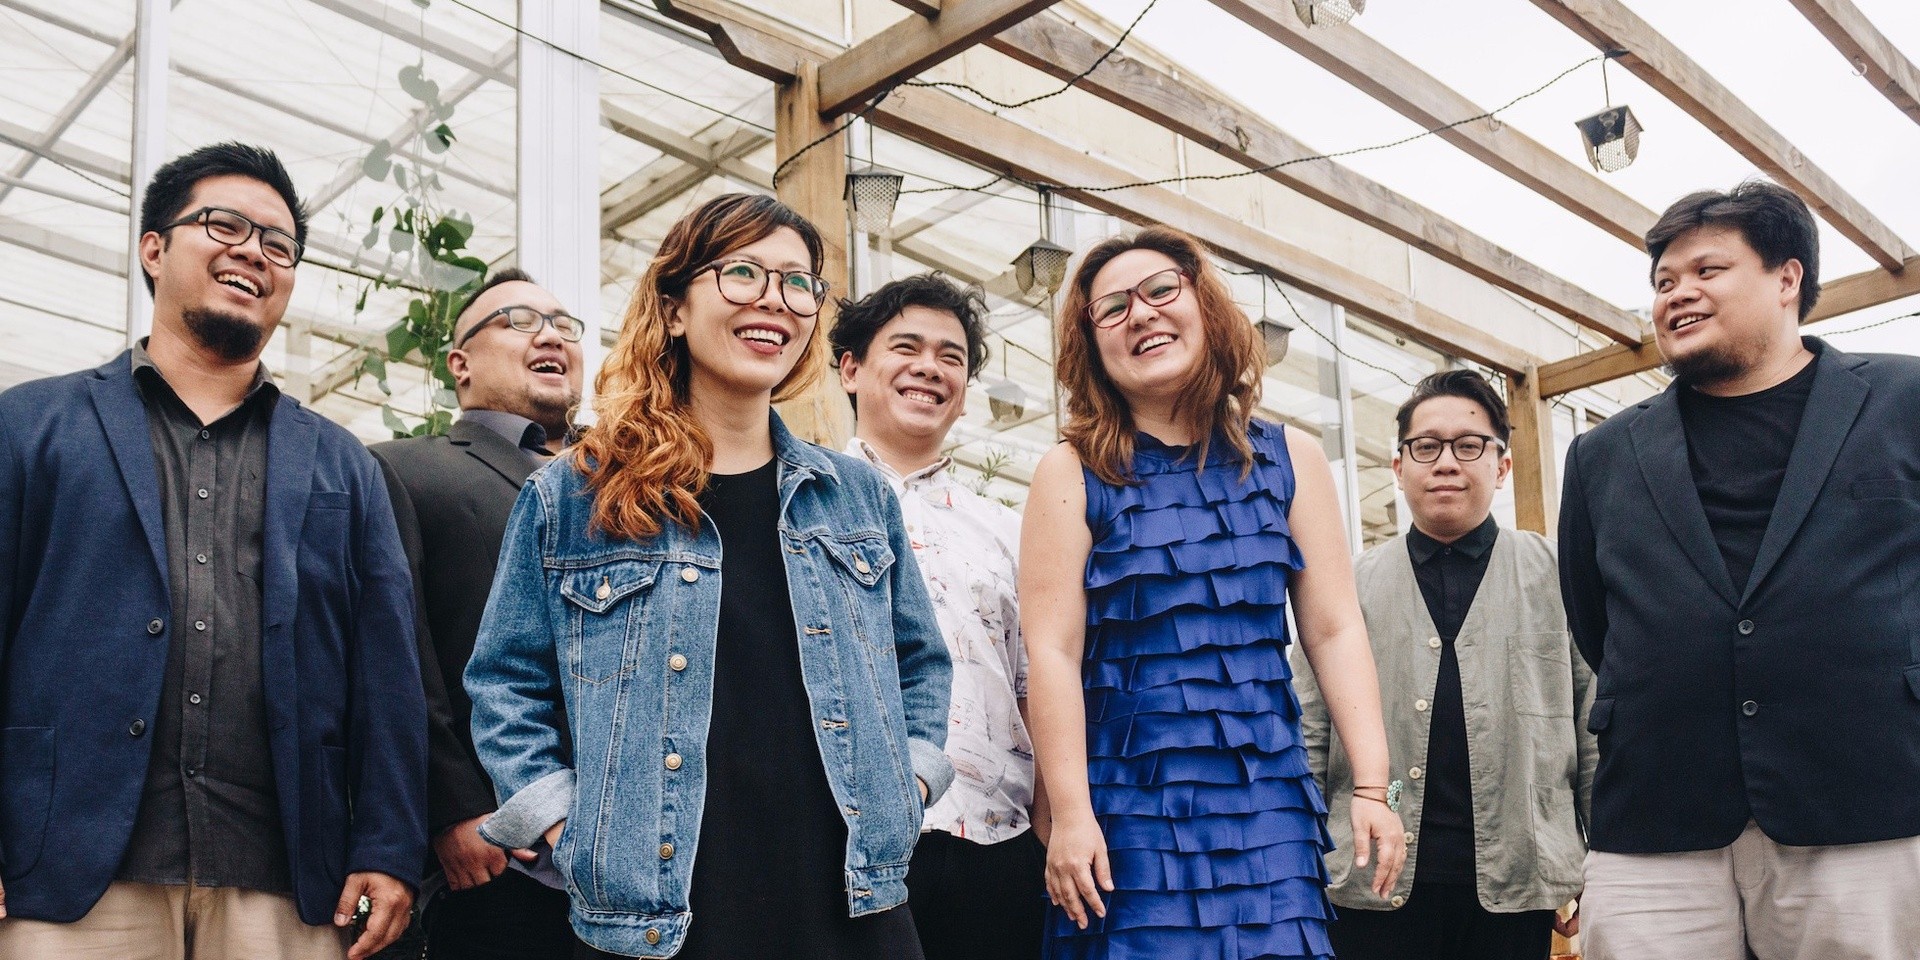 Ang Bandang Shirley release music video for "Maginhawa" and drink collaboration with Moonleaf